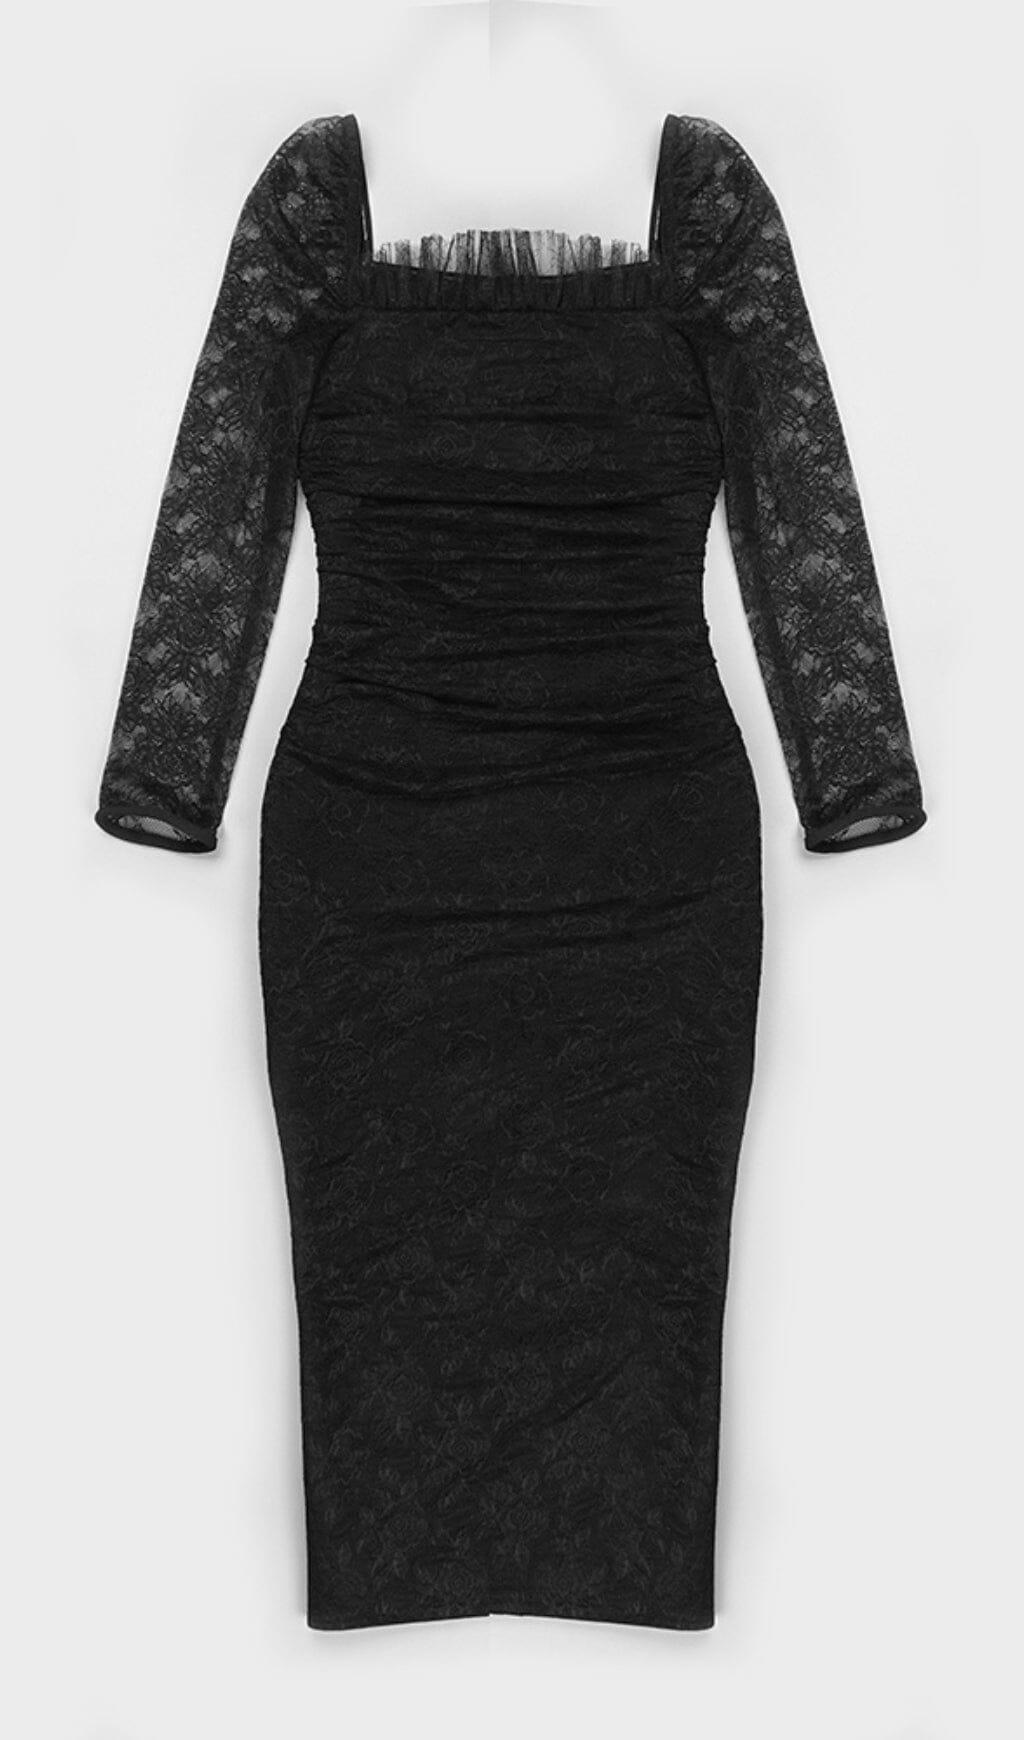 LACE LONG SLEEVE PLEATED DRESS IN BLACK